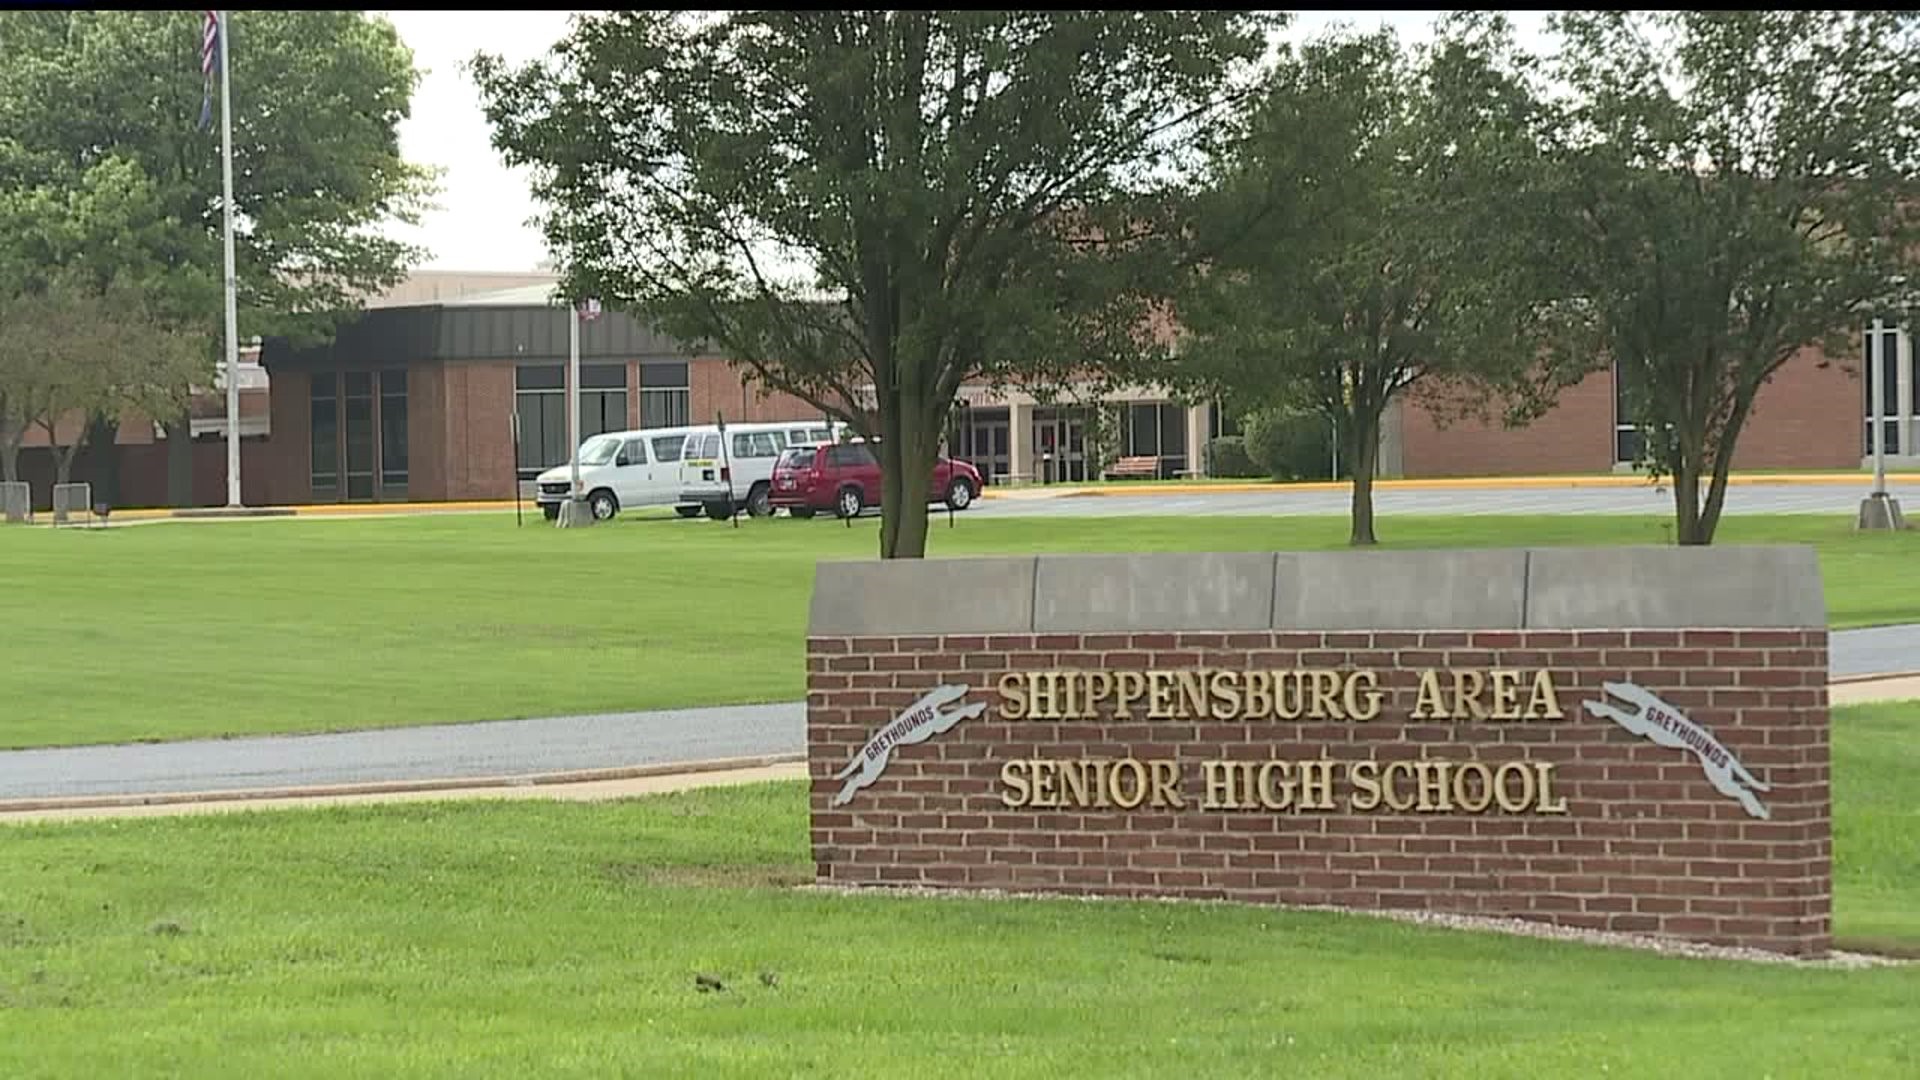 Shippensburg Area High School struck by lightning, delays first day